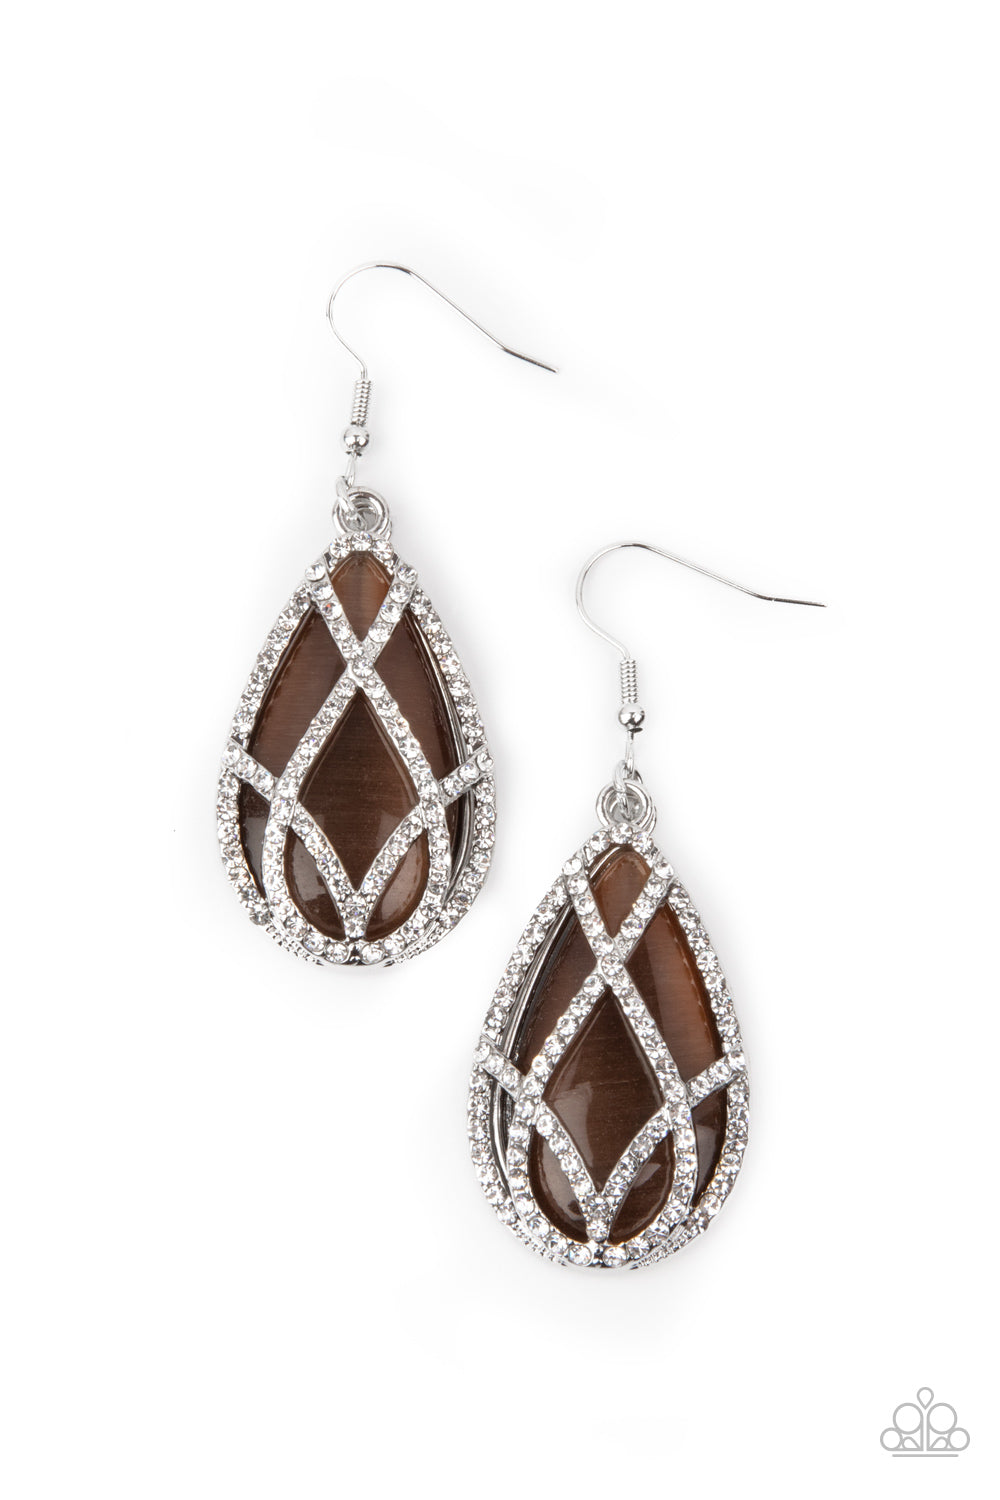 Crawling With Couture Brown Earring - Paparazzi Accessories  White rhinestone encrusted silver bars crisscross into a glittering beveled teardrop that delicately overlaps an oversized brown teardrop cat's eye stone, creating a luminously layered lure. Earring attaches to a standard fishhook fitting.  All Paparazzi Accessories are lead free and nickel free!  Sold as one pair of earrings.